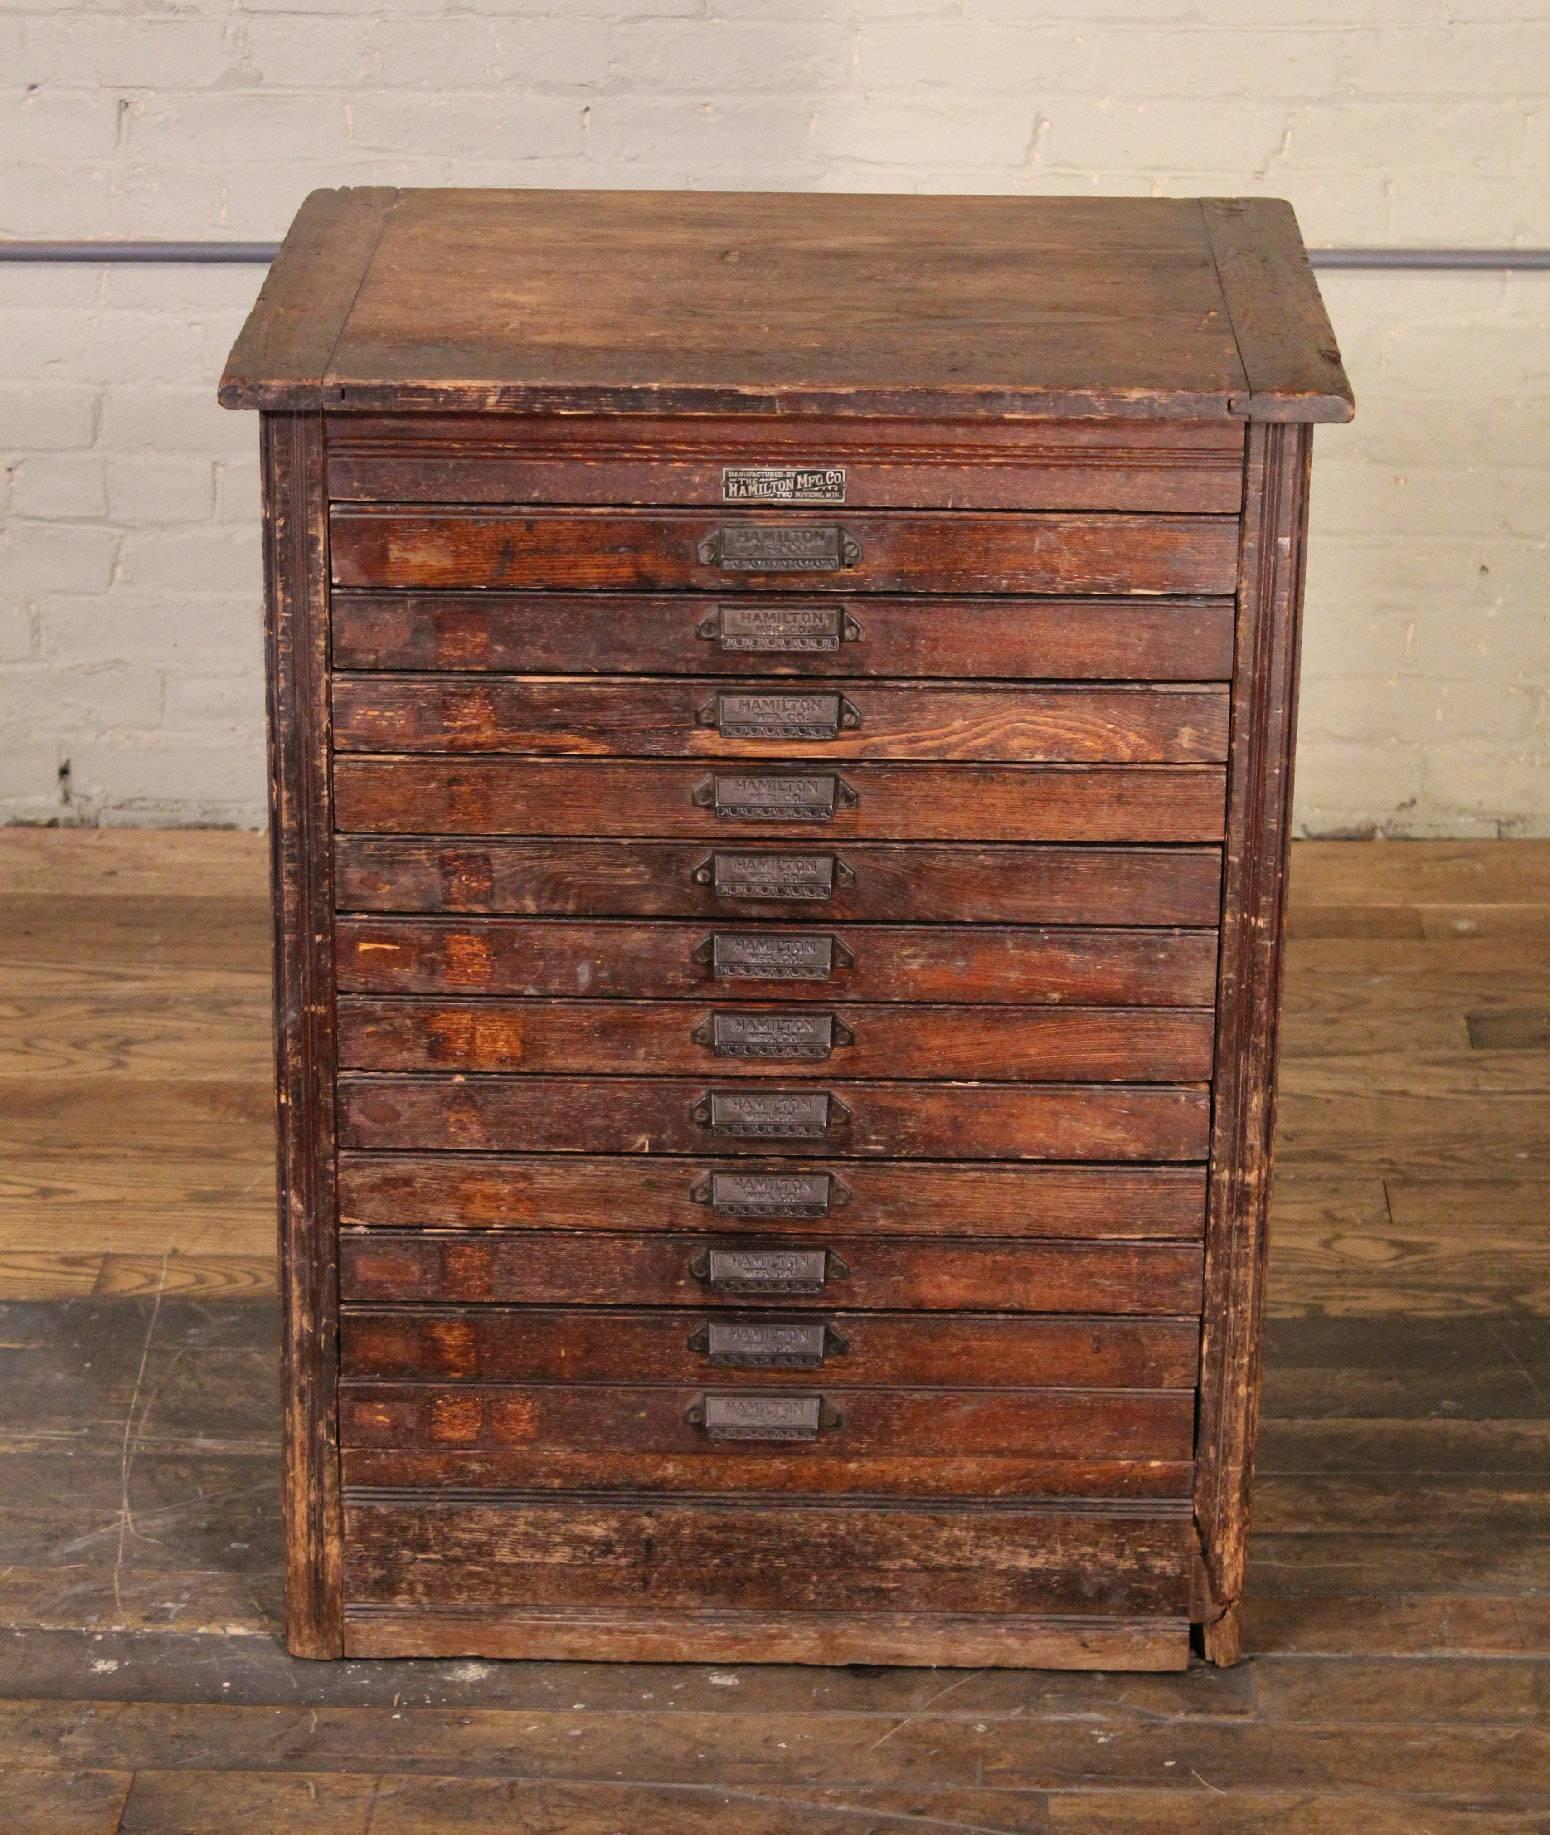 Antique wood flat file cabinet made by Hamilton. Measure: 26 3/4